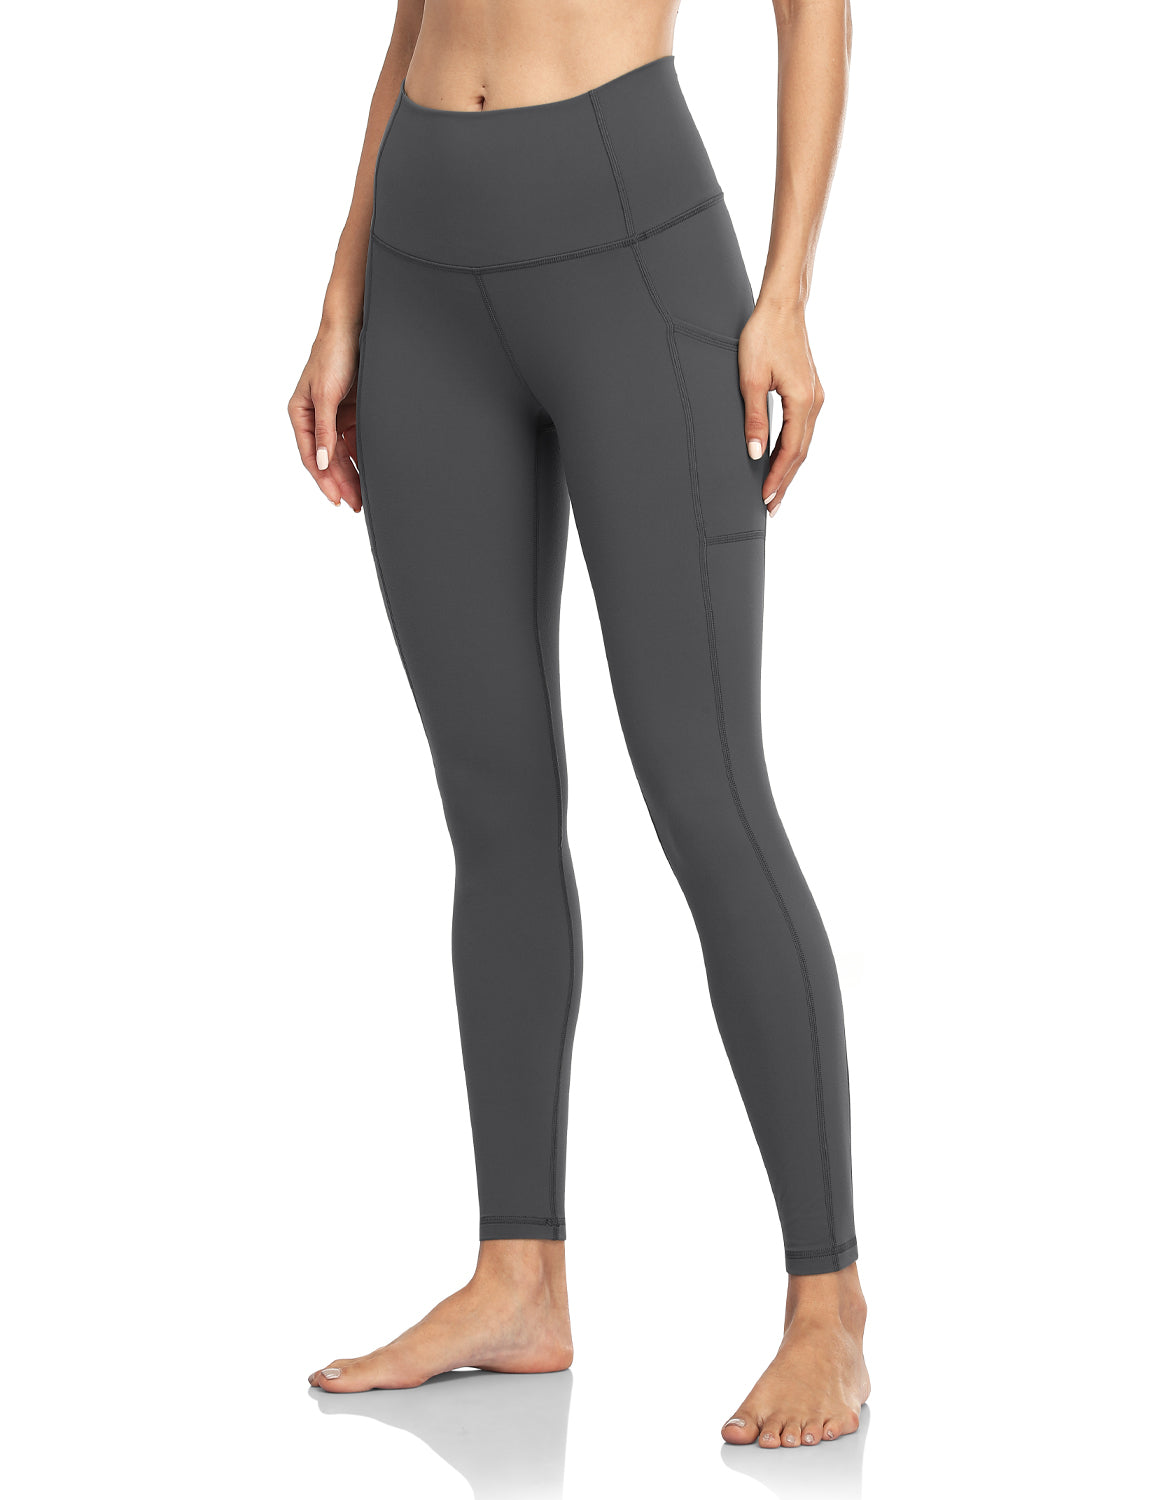 HeyNuts Pure&Plain 7/8 High Waisted Leggings for Women, Athletic  Compression Tummy Control Workout Yoga Pants 25'' Dark Carbon Dust XS(0/2)  : Buy Online at Best Price in KSA - Souq is now